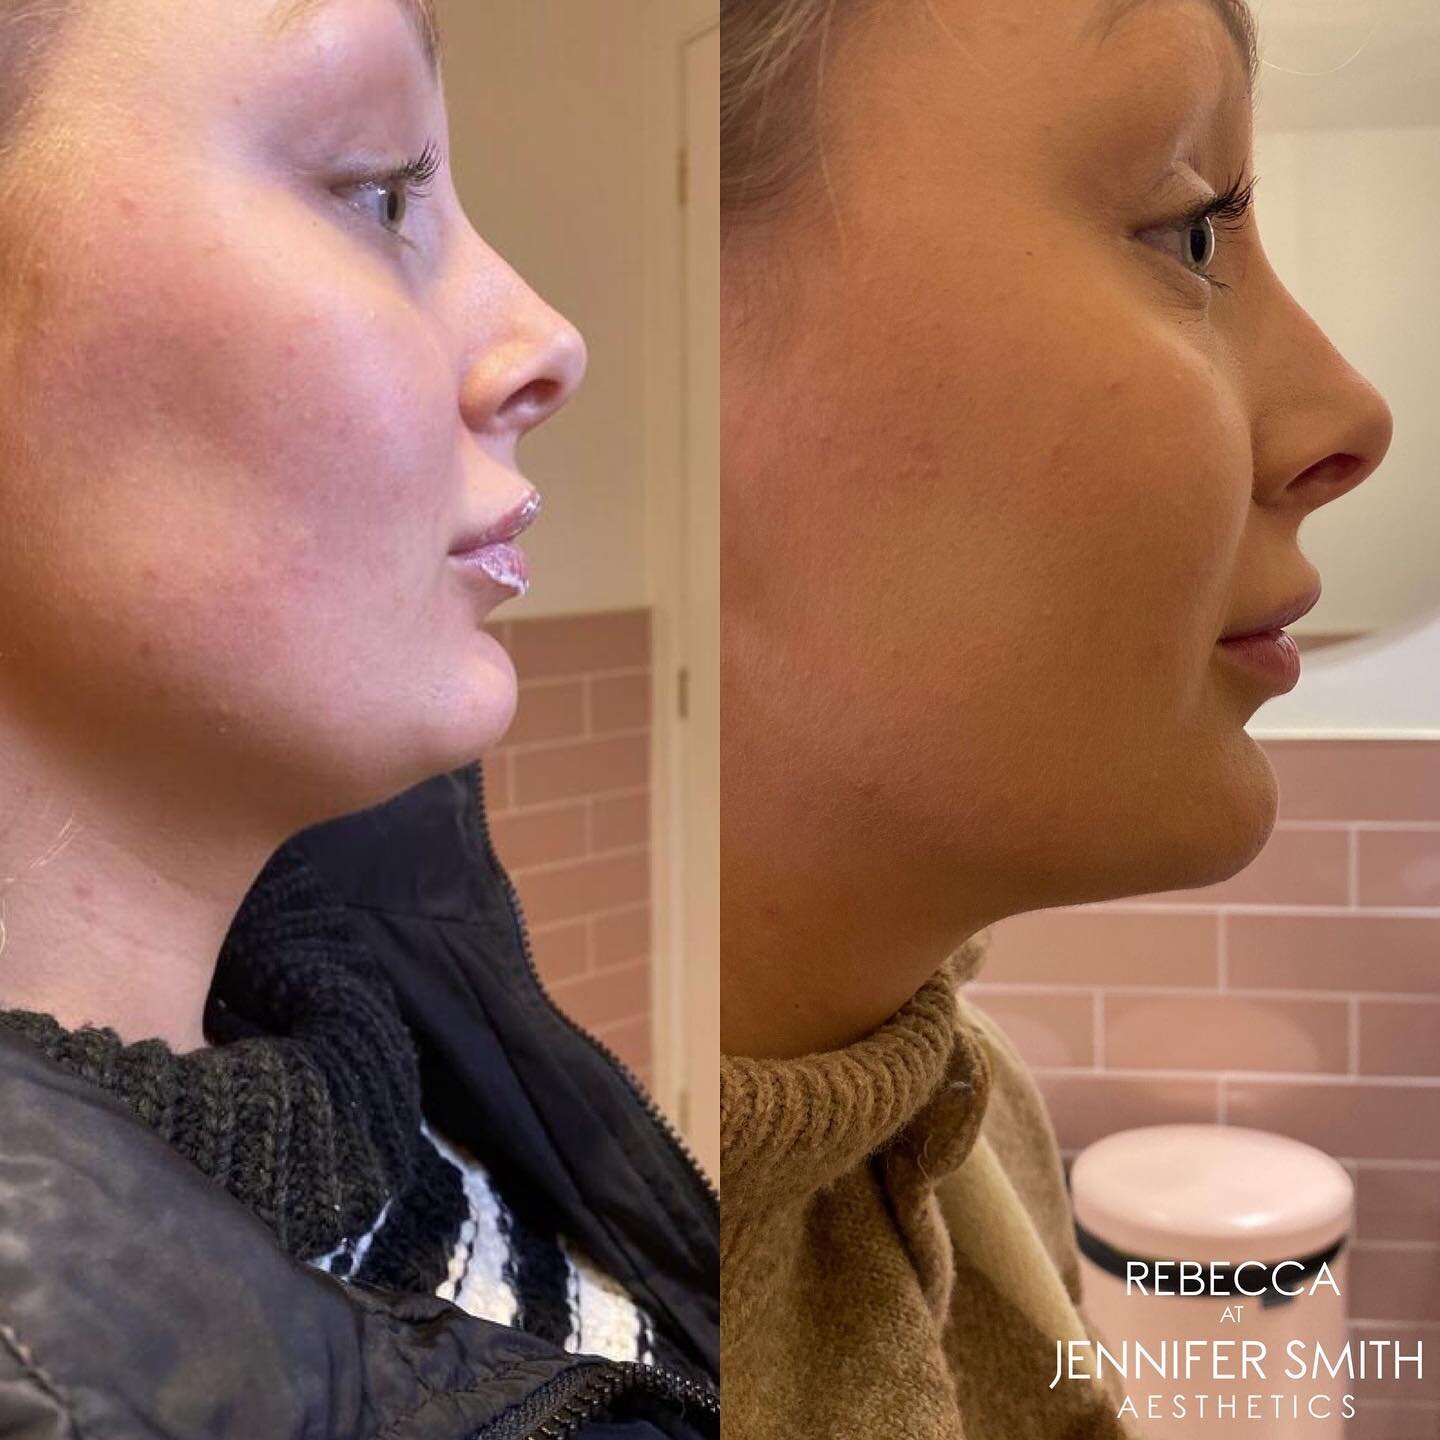 Fat dissolving results after one session 💉✨

Fat dissolving injections break down fat in a controlled way, so your body can safely remove it through its lymphatic system. This simple and effective procedure shrinks double chins as well as improving 